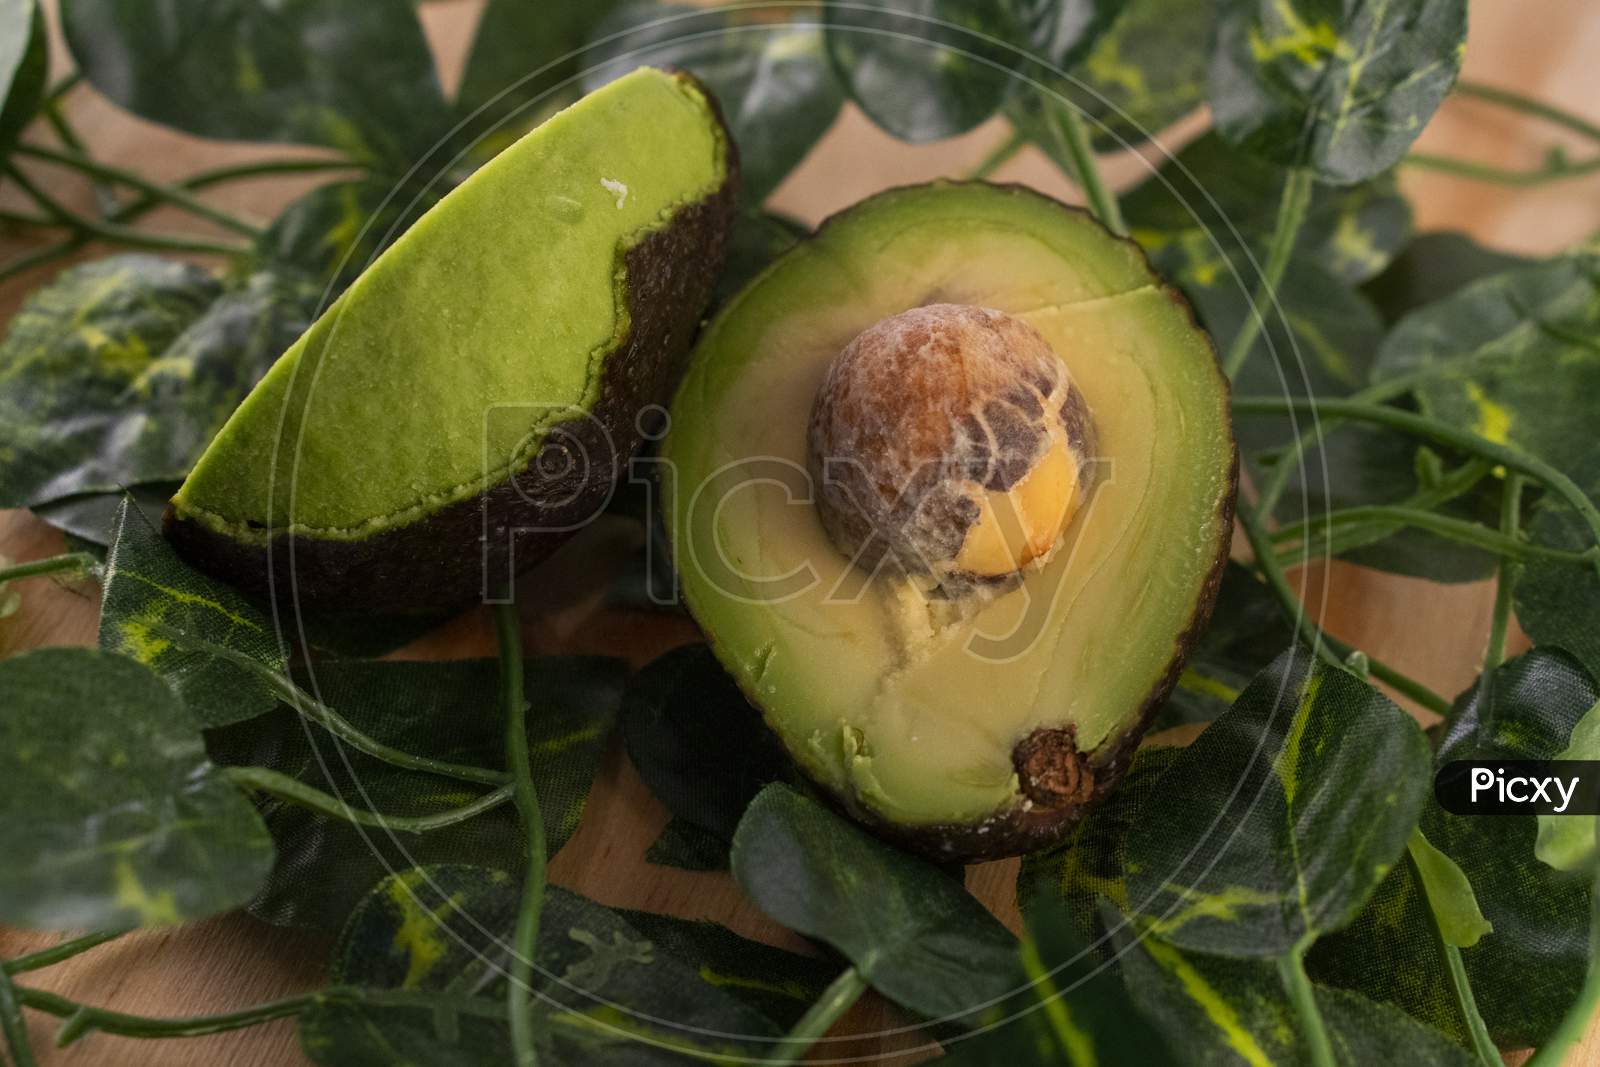 A sliced avocado with the seed